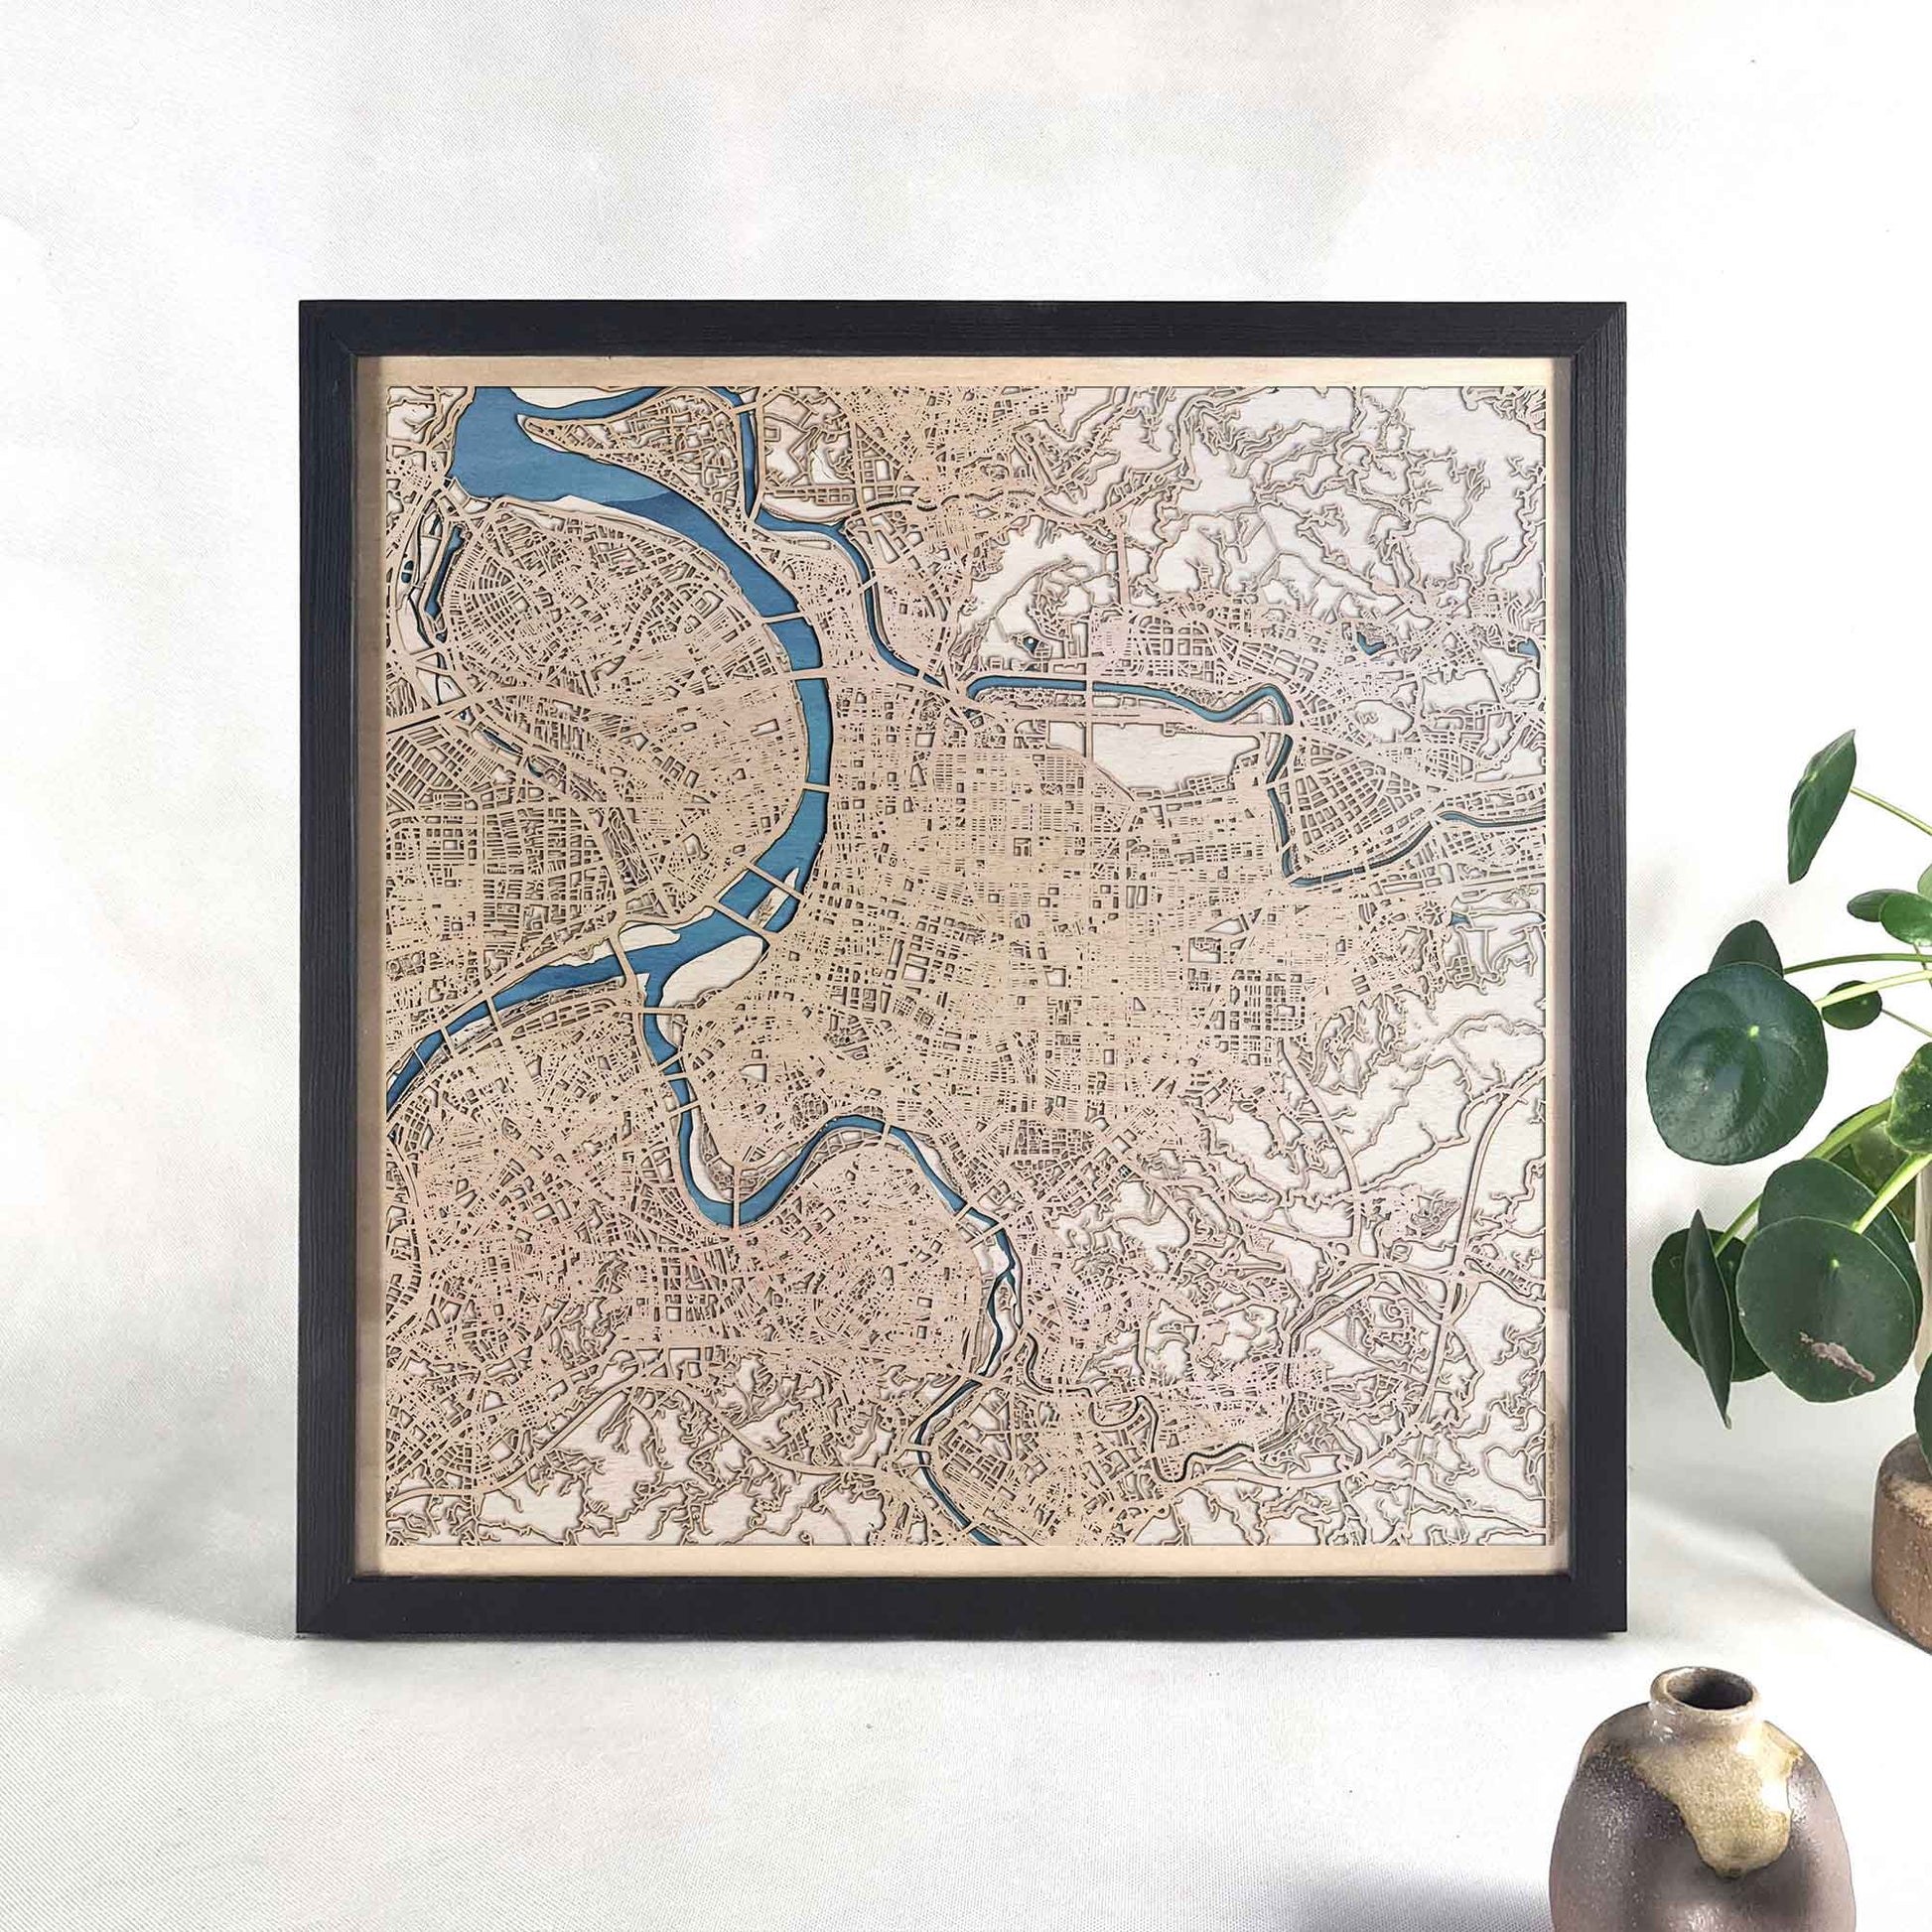 Taipei Wooden Map by CityWood - Custom Wood Map Art - Unique Laser Cut Engraved - Anniversary Gift